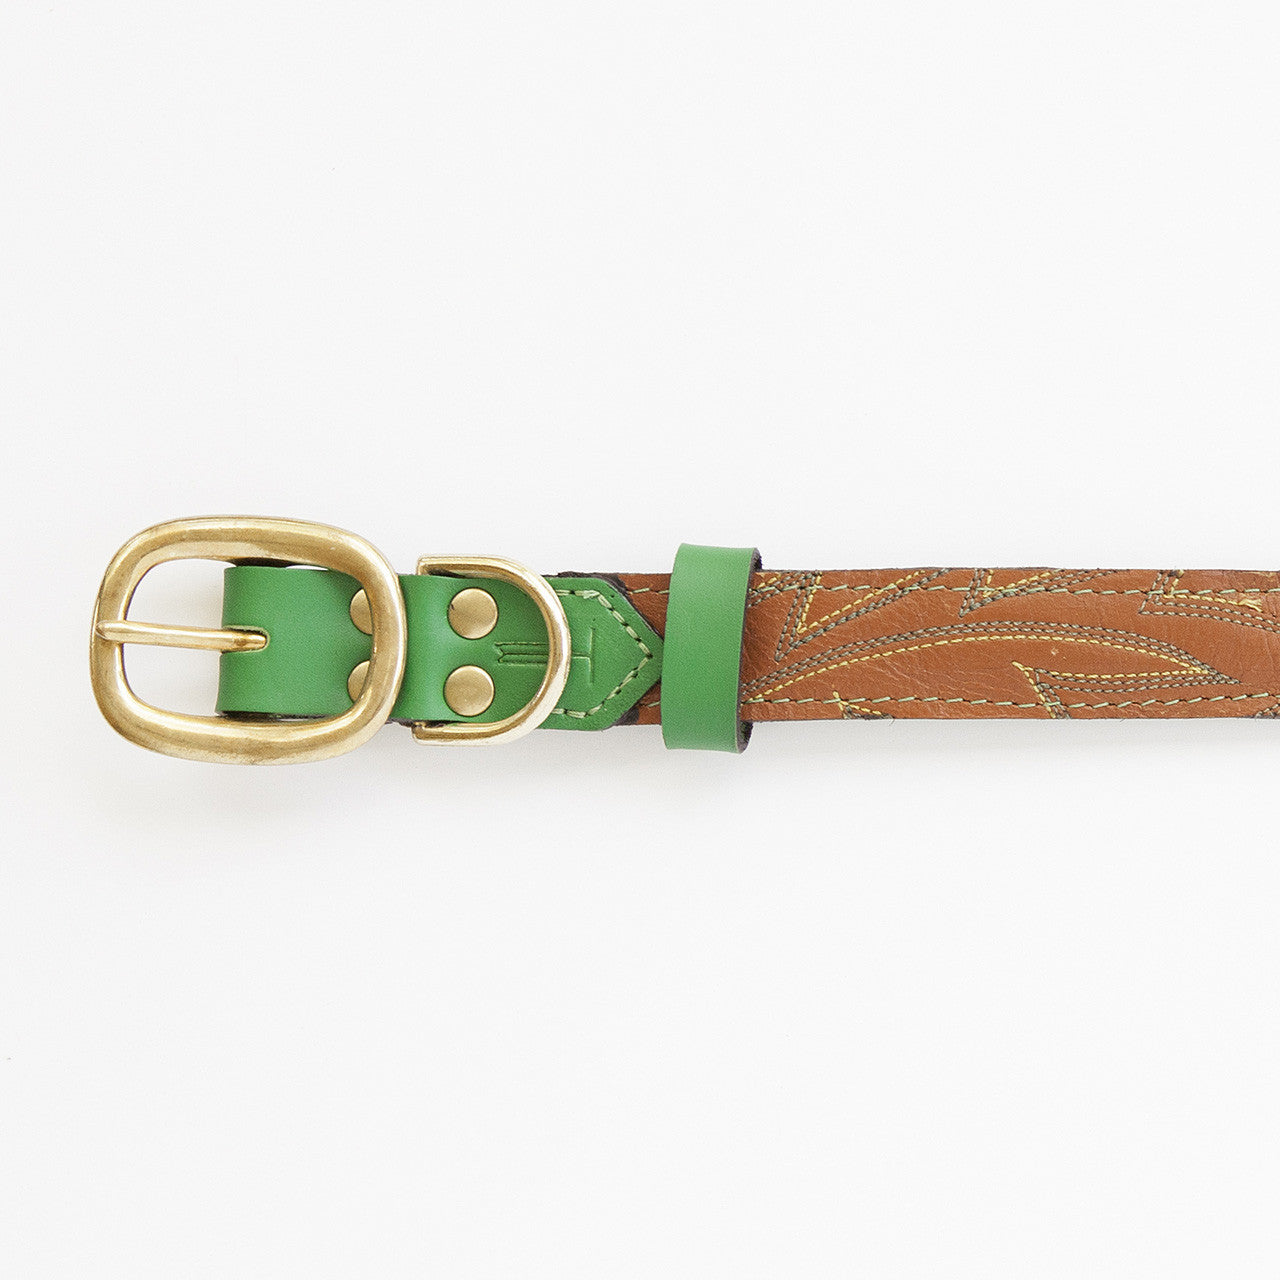 Emerald Green Dog Collar with Brown Leather + Green and Yellow Stitching (buckle)